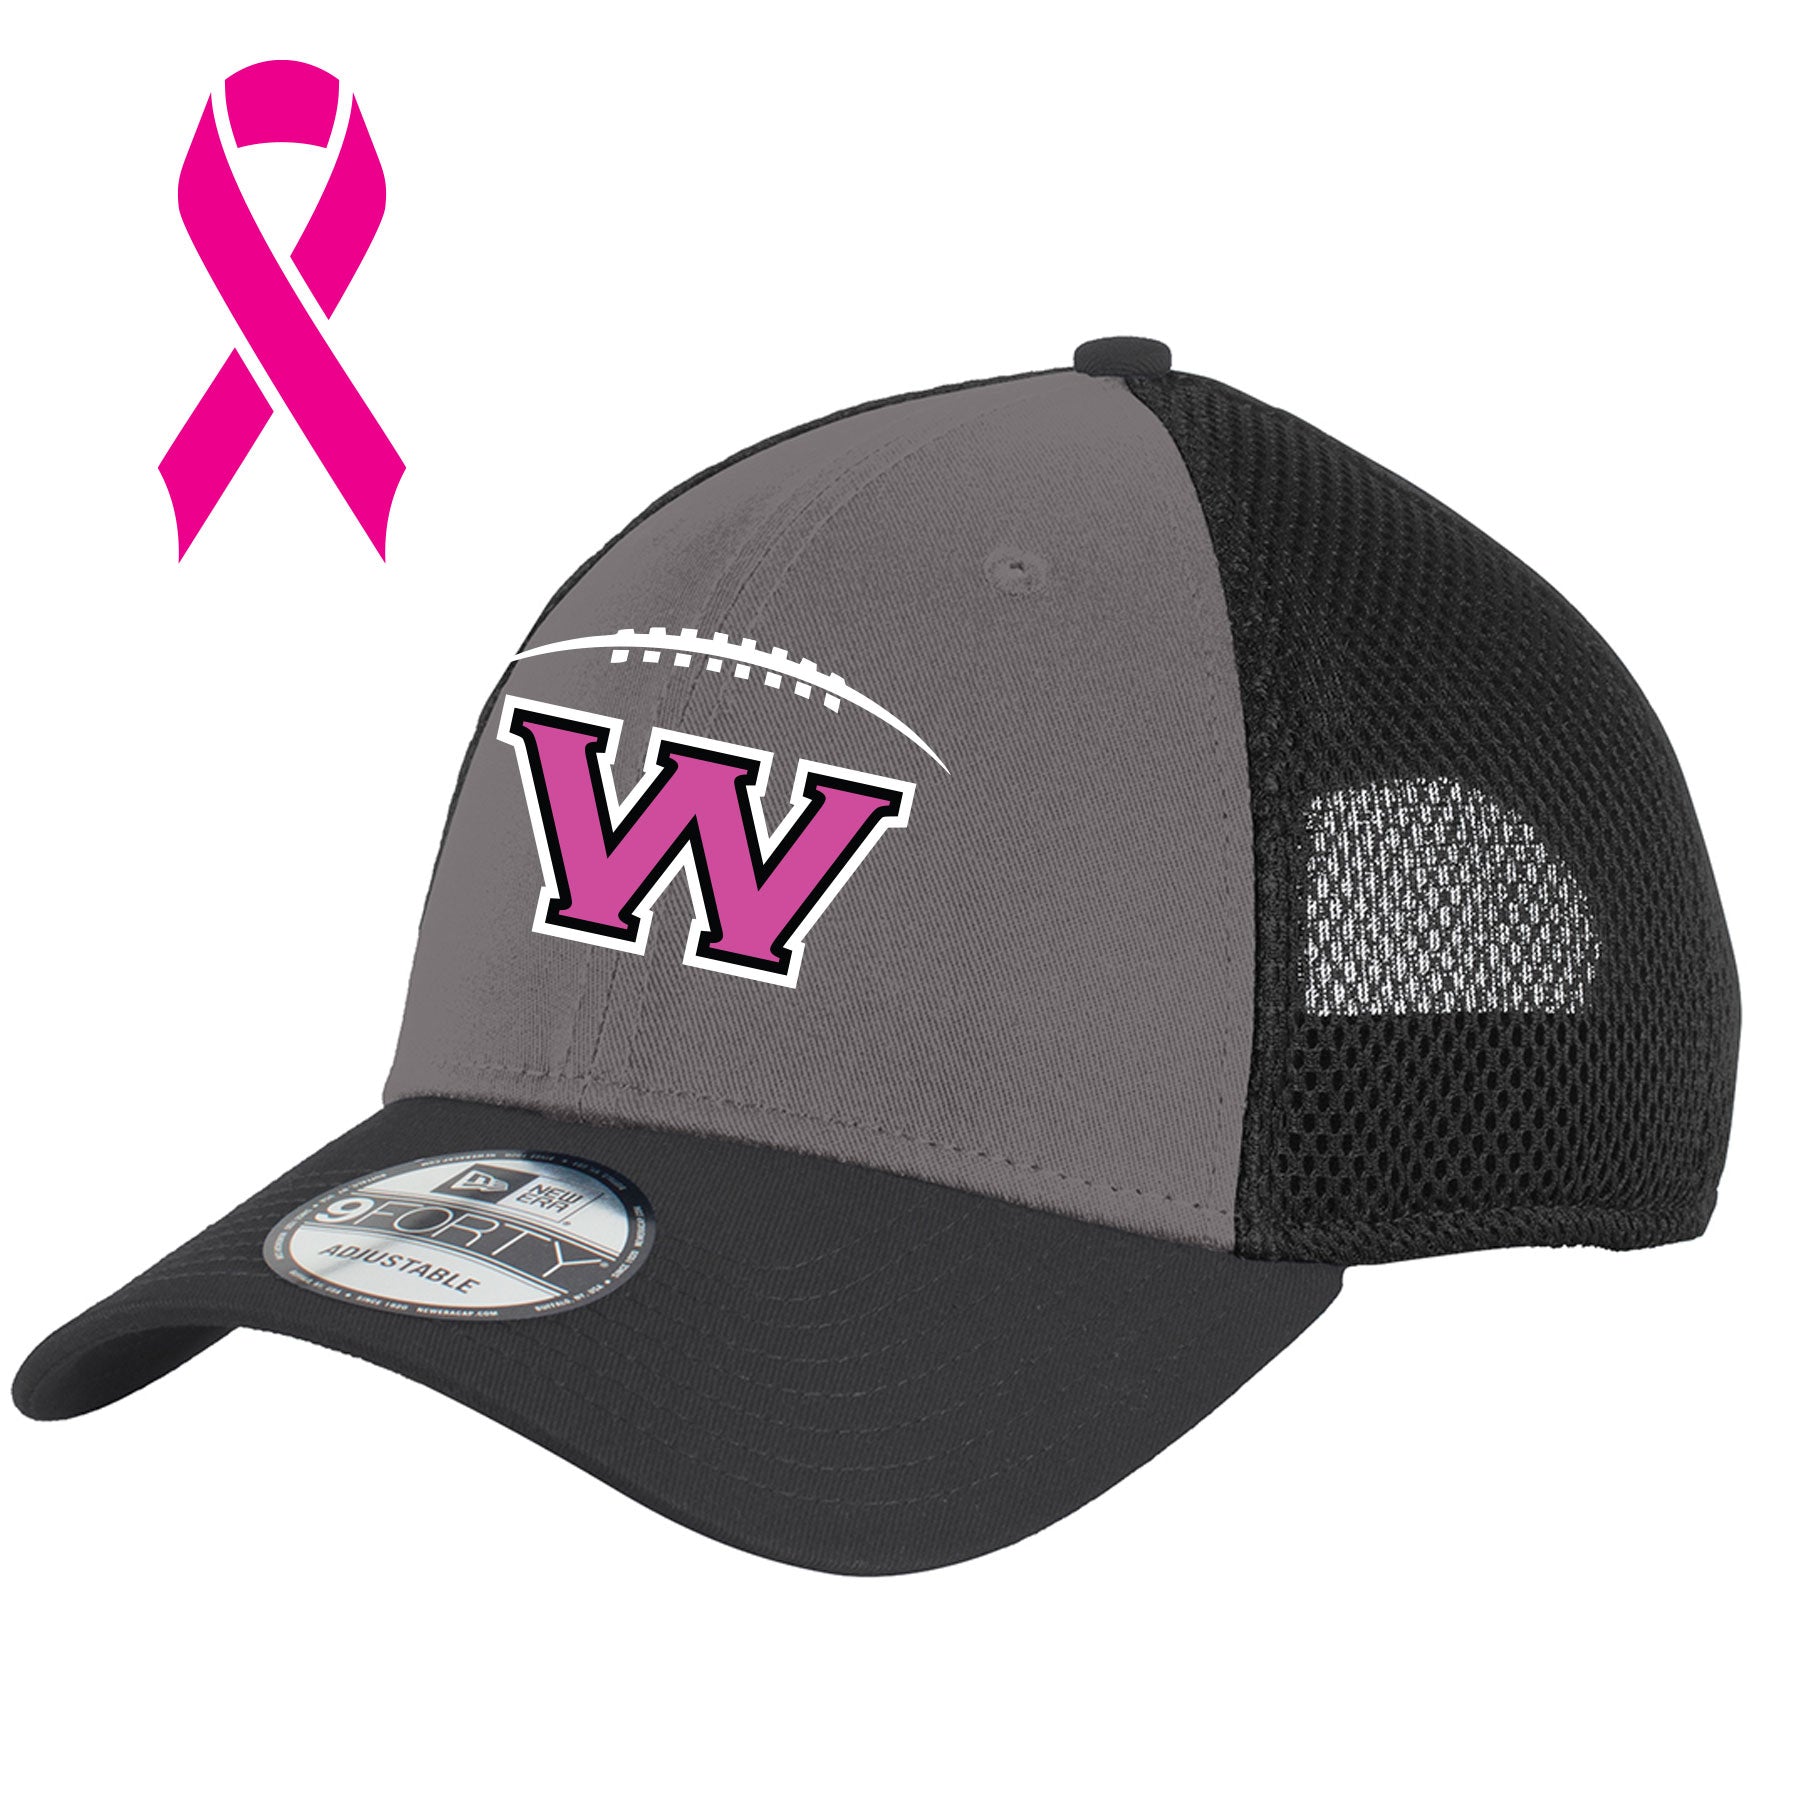 WESTVIEW FOOTBALL  - NEW ERA¨ SNAPBACK CONTRAST FRONT MESH CAP - BREAST CANCER MONTH LOGO